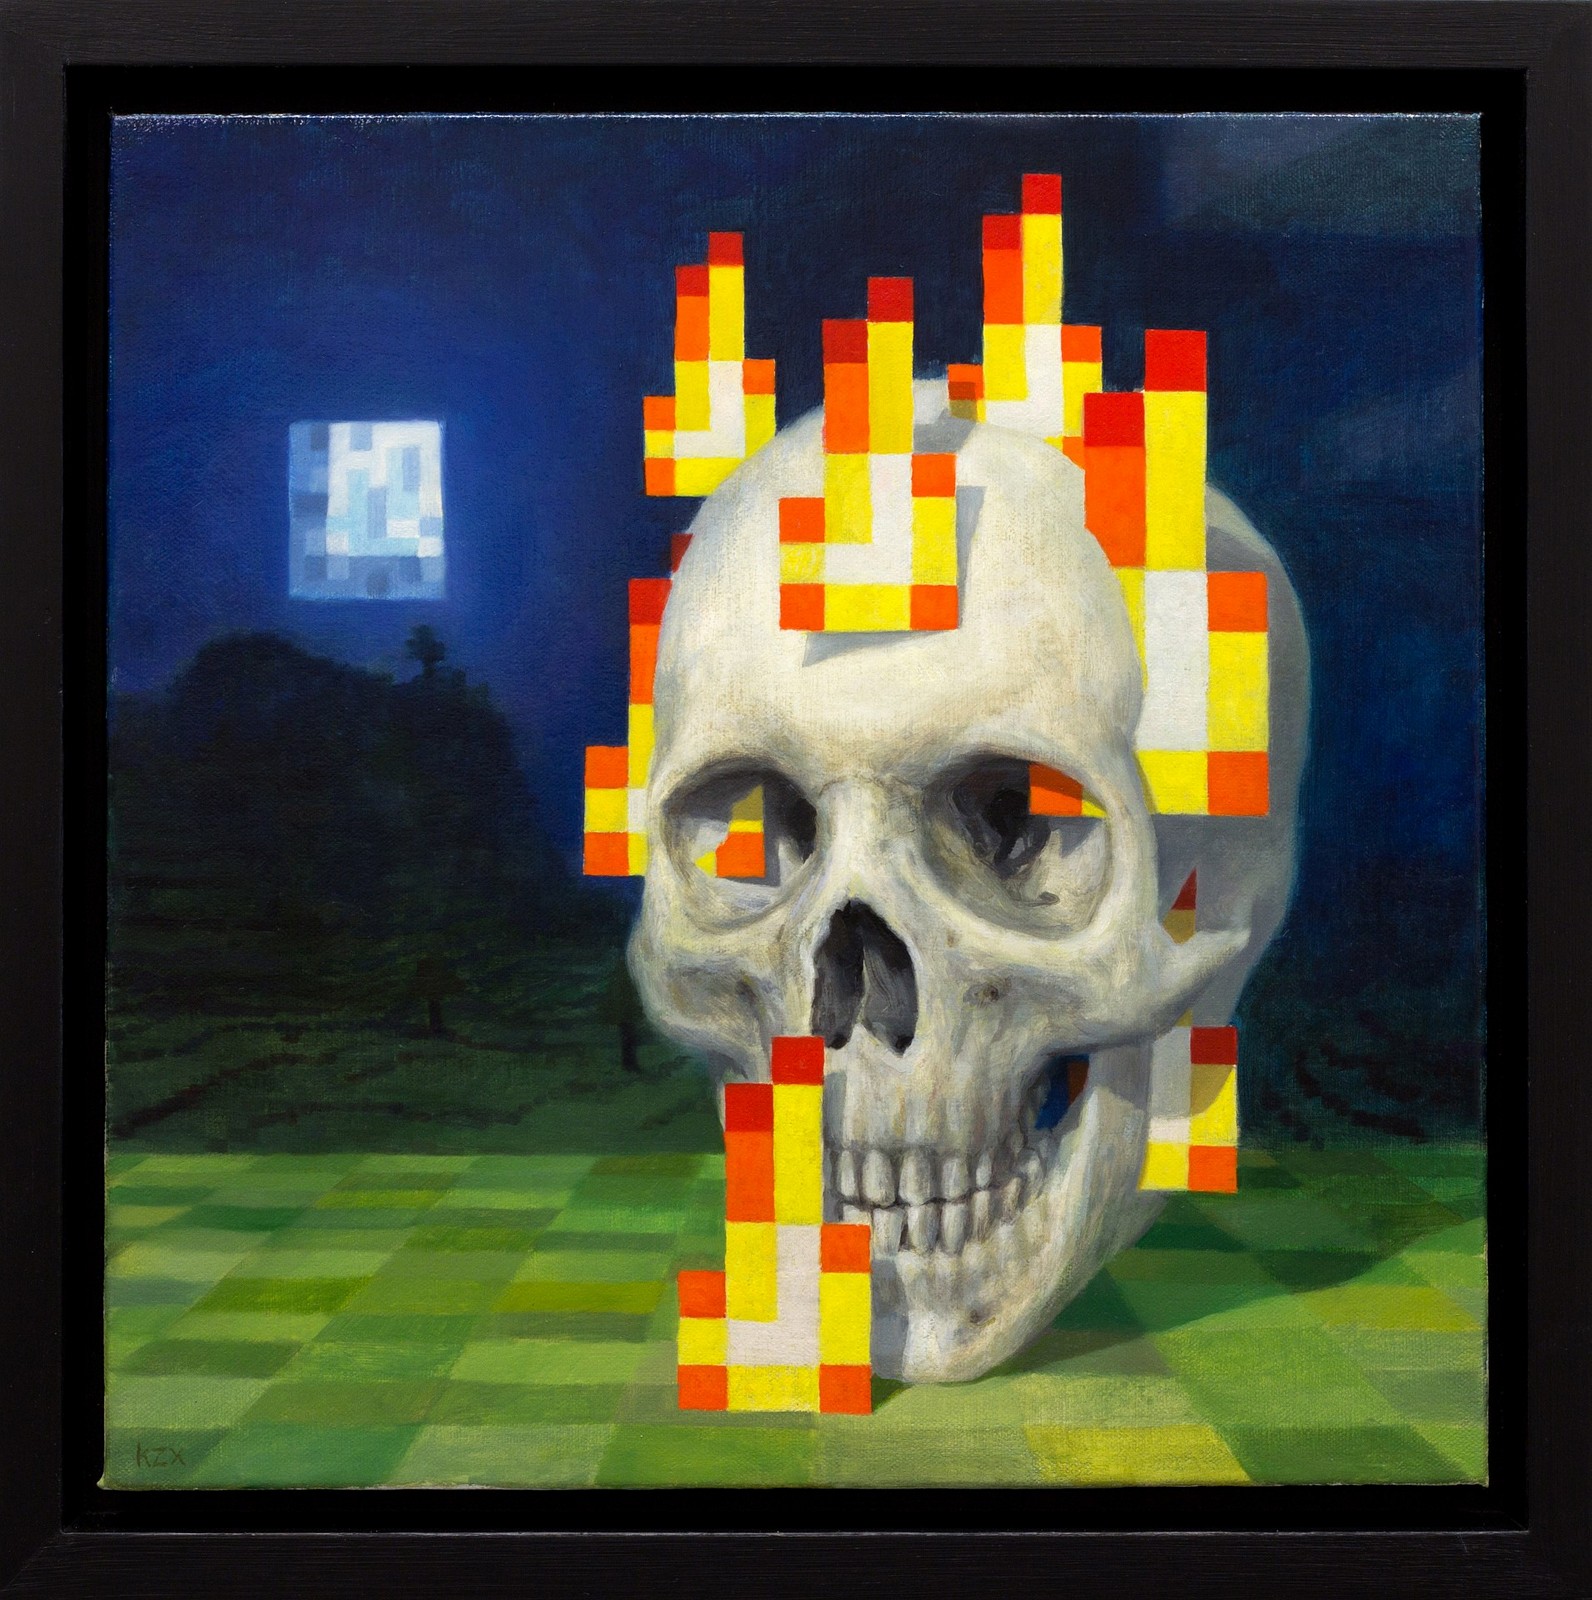 High resolution version of the Skull on Fire painting. A skull with some fire particles inside of a Minecraft world with a mountain in the background